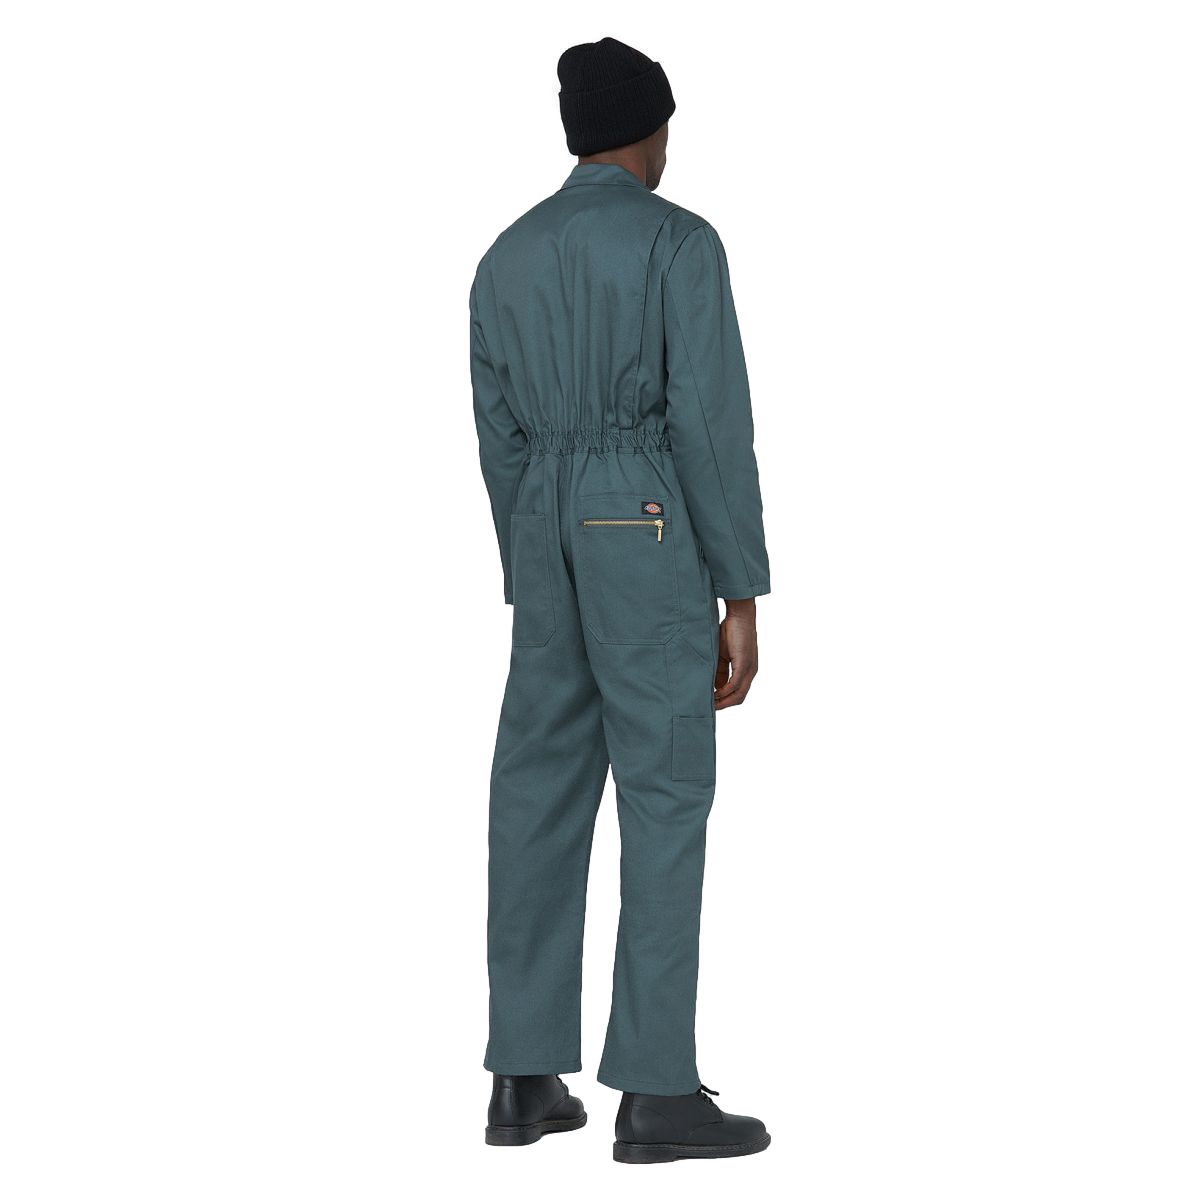 Combinaison Redhawk Coverhall Vert - Dickies - Taille M 4